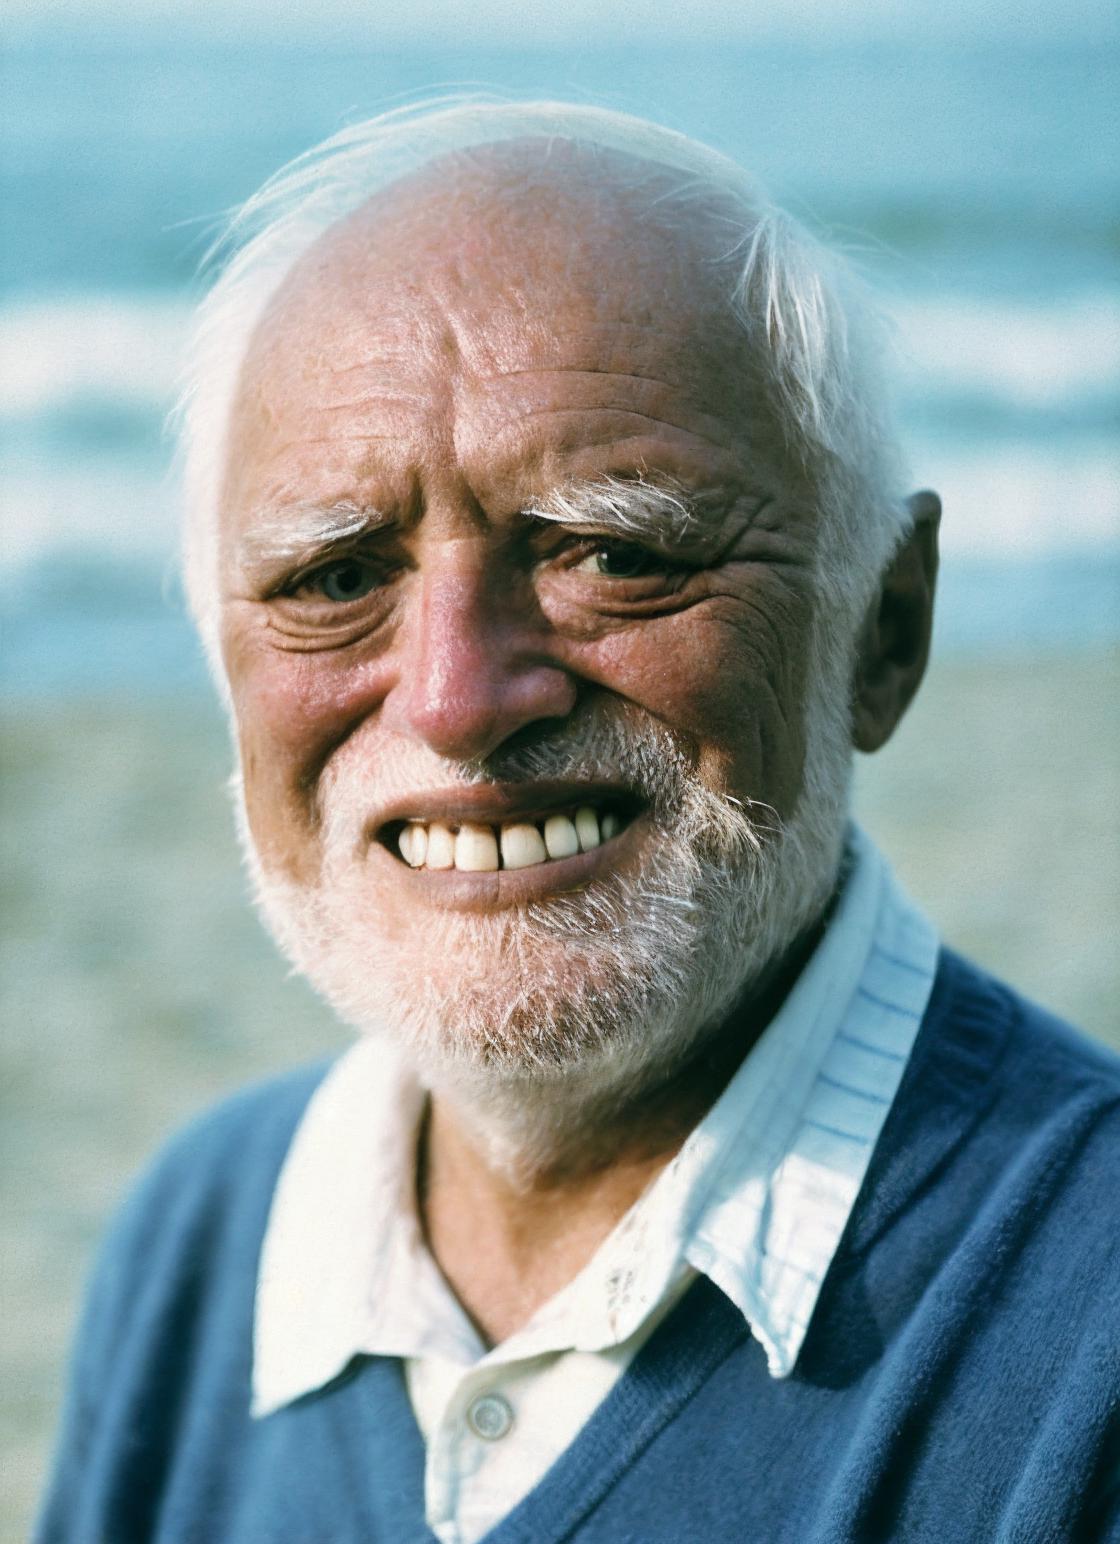 Old man smiling on the beach, wearing a blue shirt and a striped sweater.